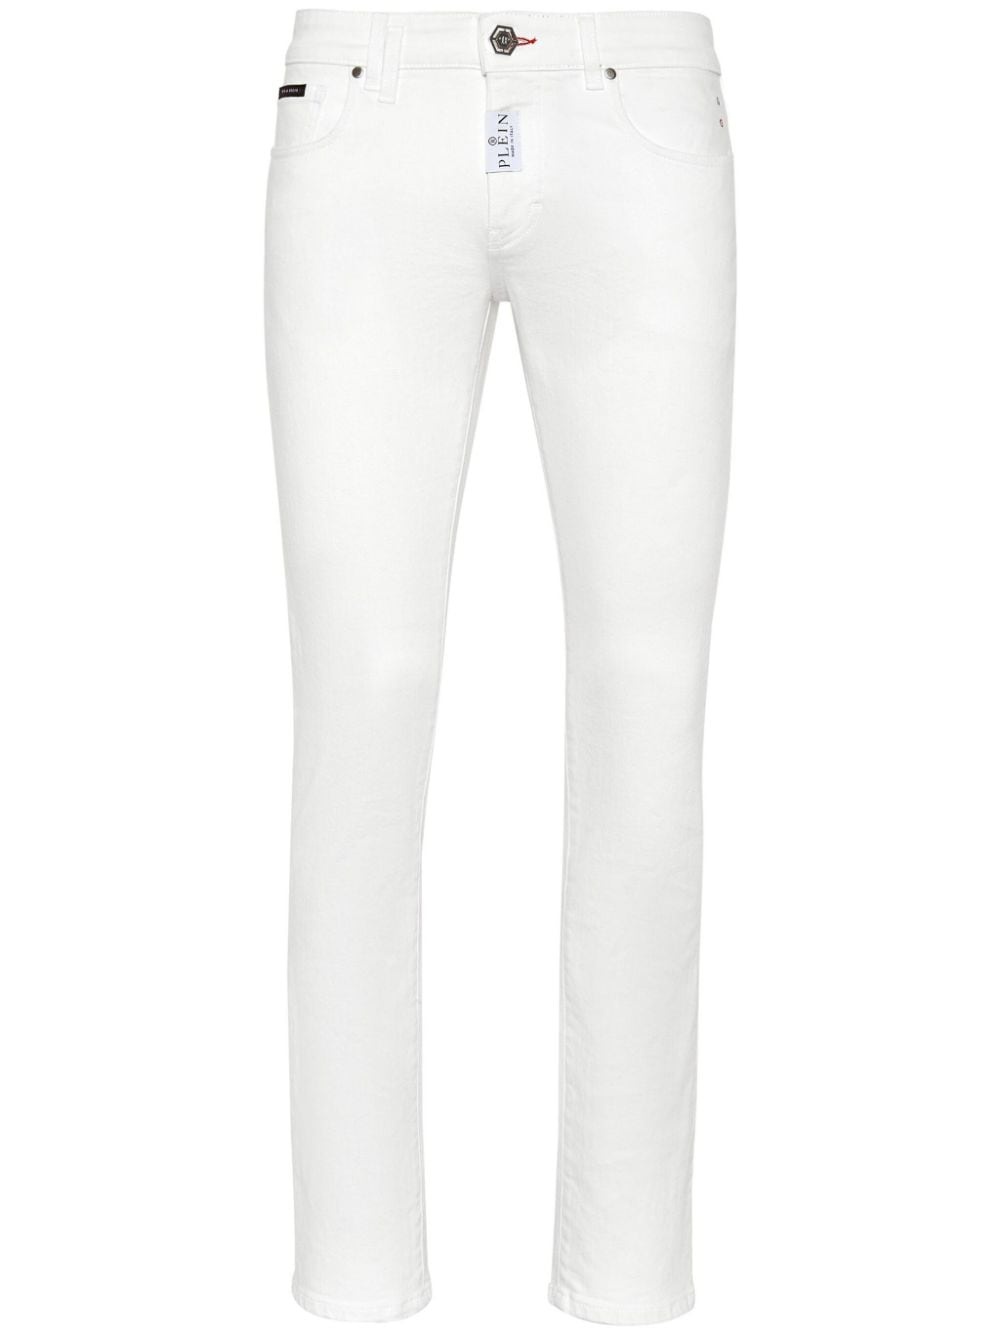 low-rise skinny jeans - 1